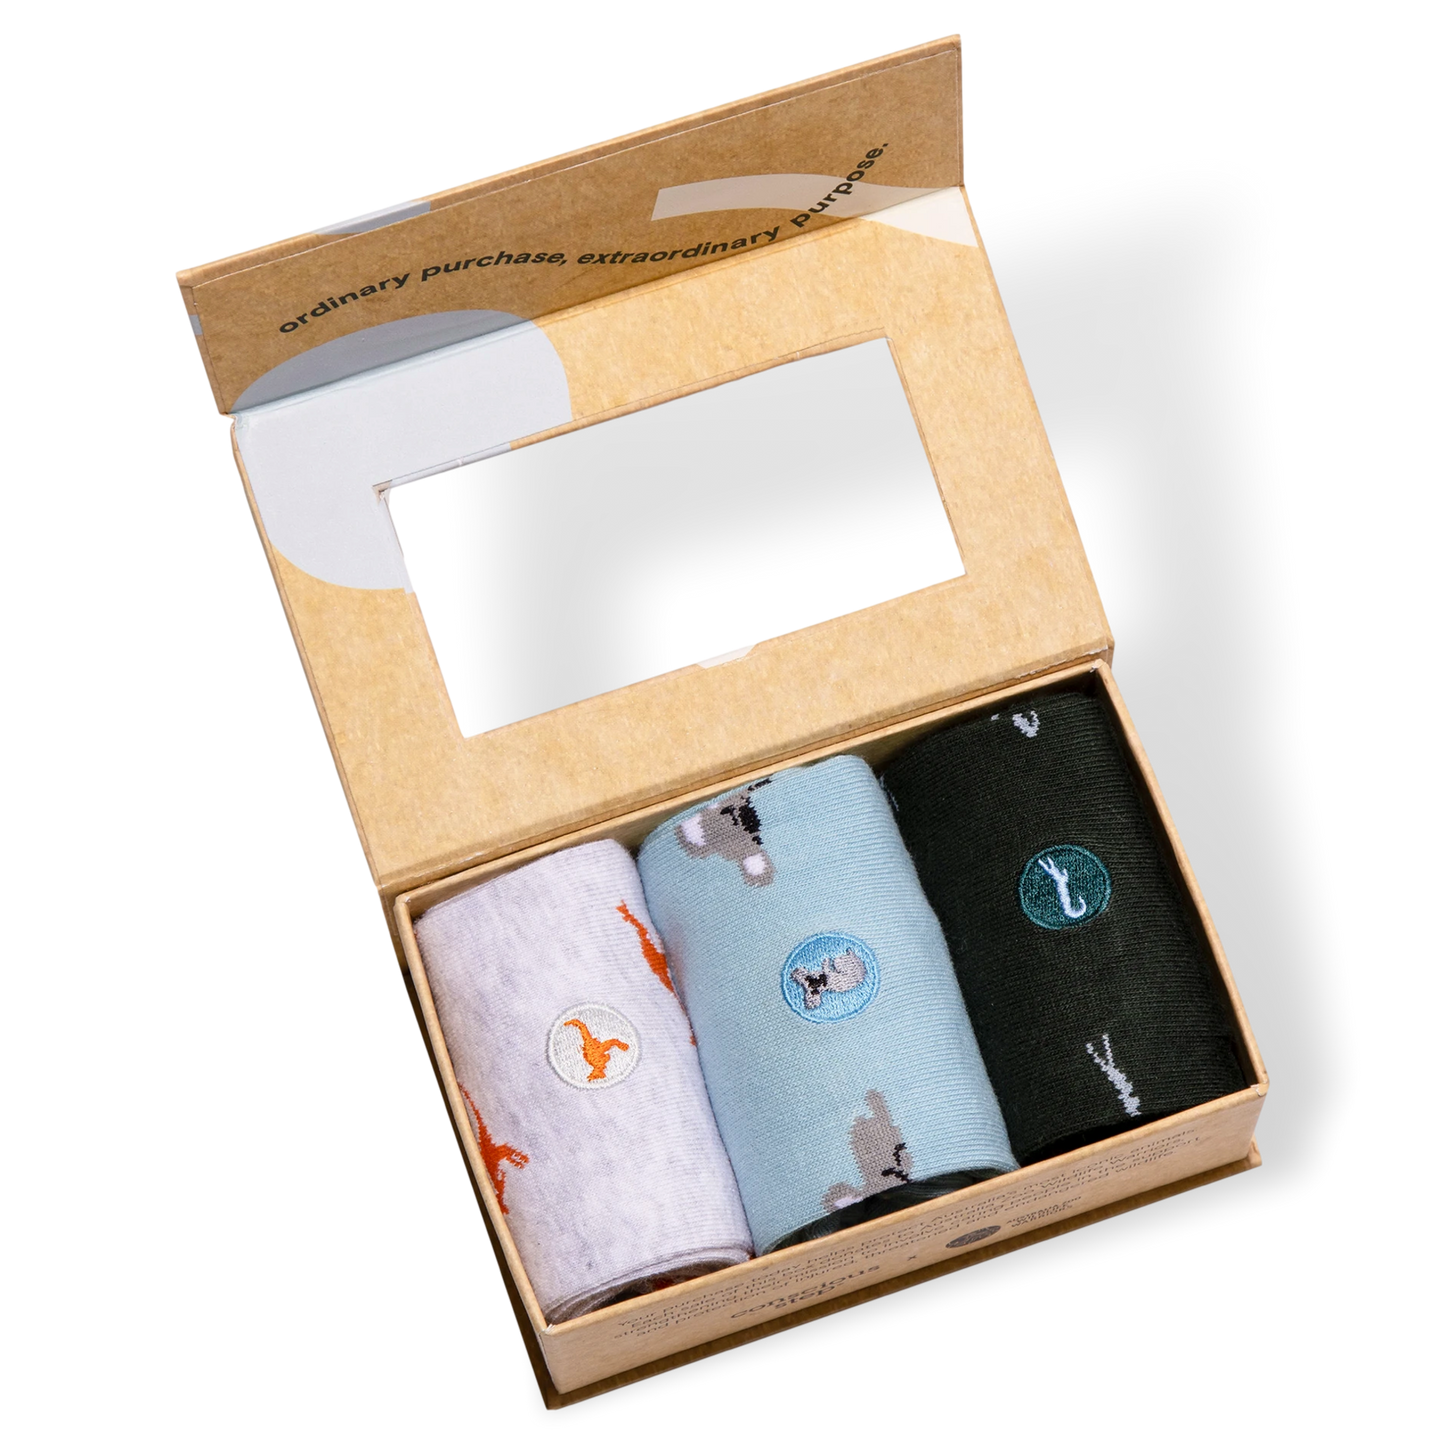 Socks that protect animals - Boxed Collection